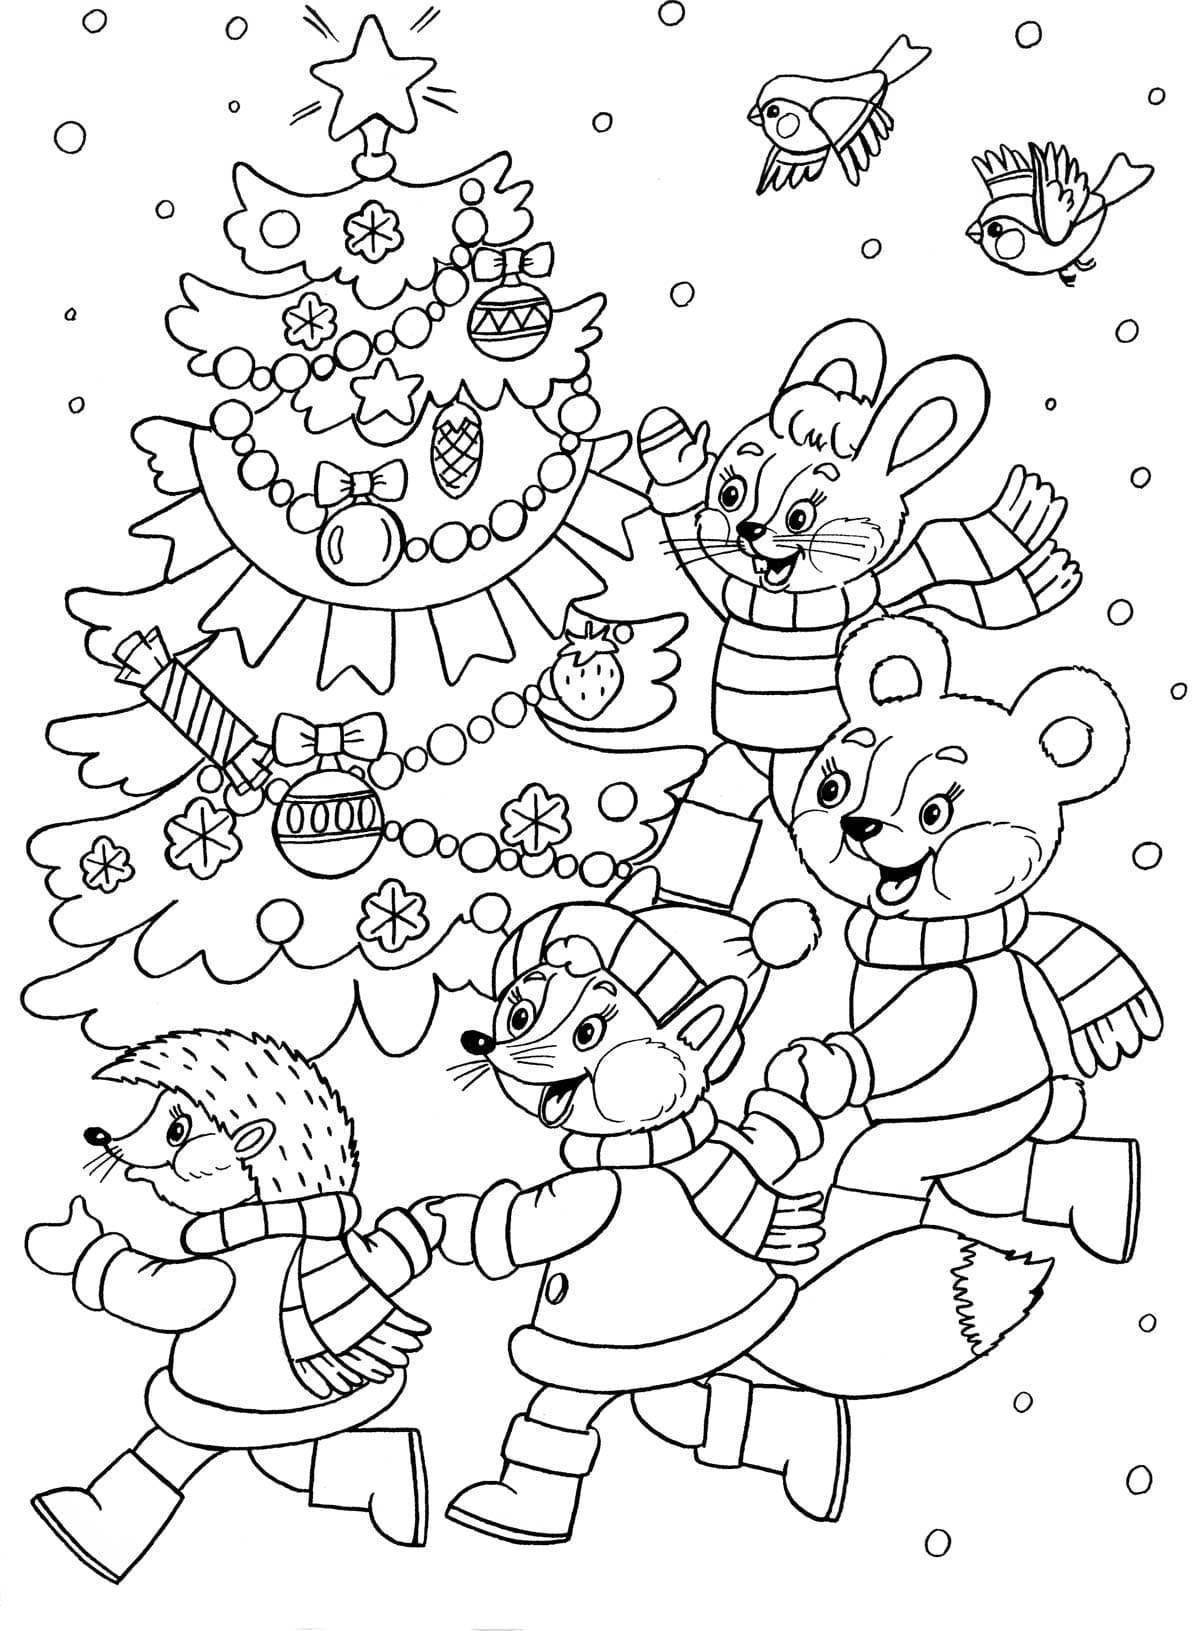 1st class glowing Christmas coloring book